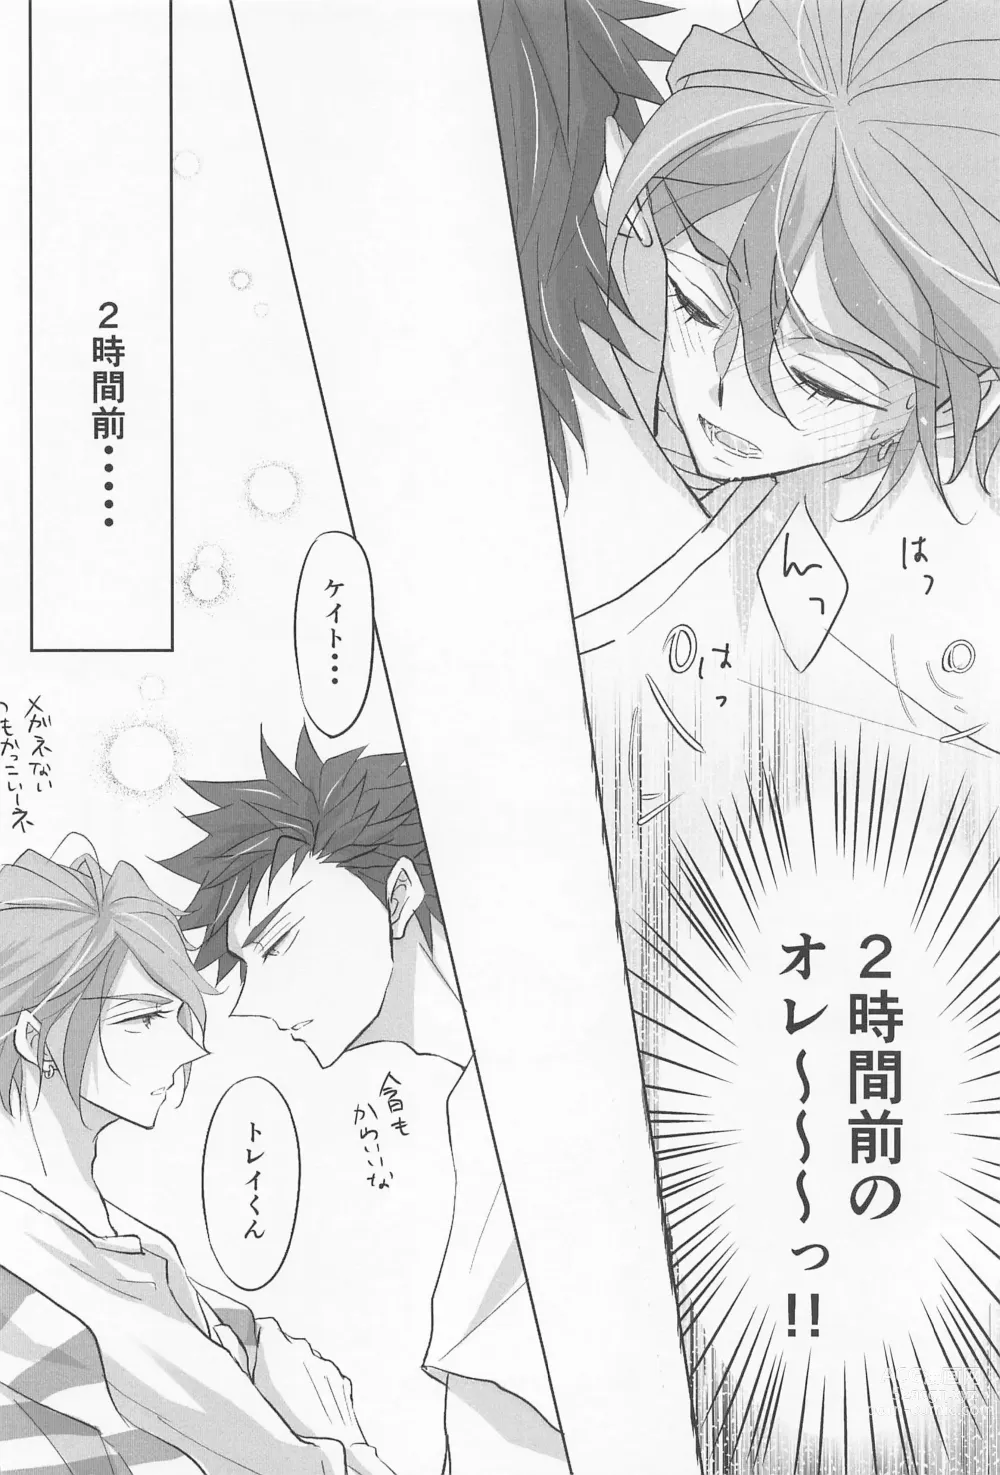 Page 45 of doujinshi My heart dedicated to you